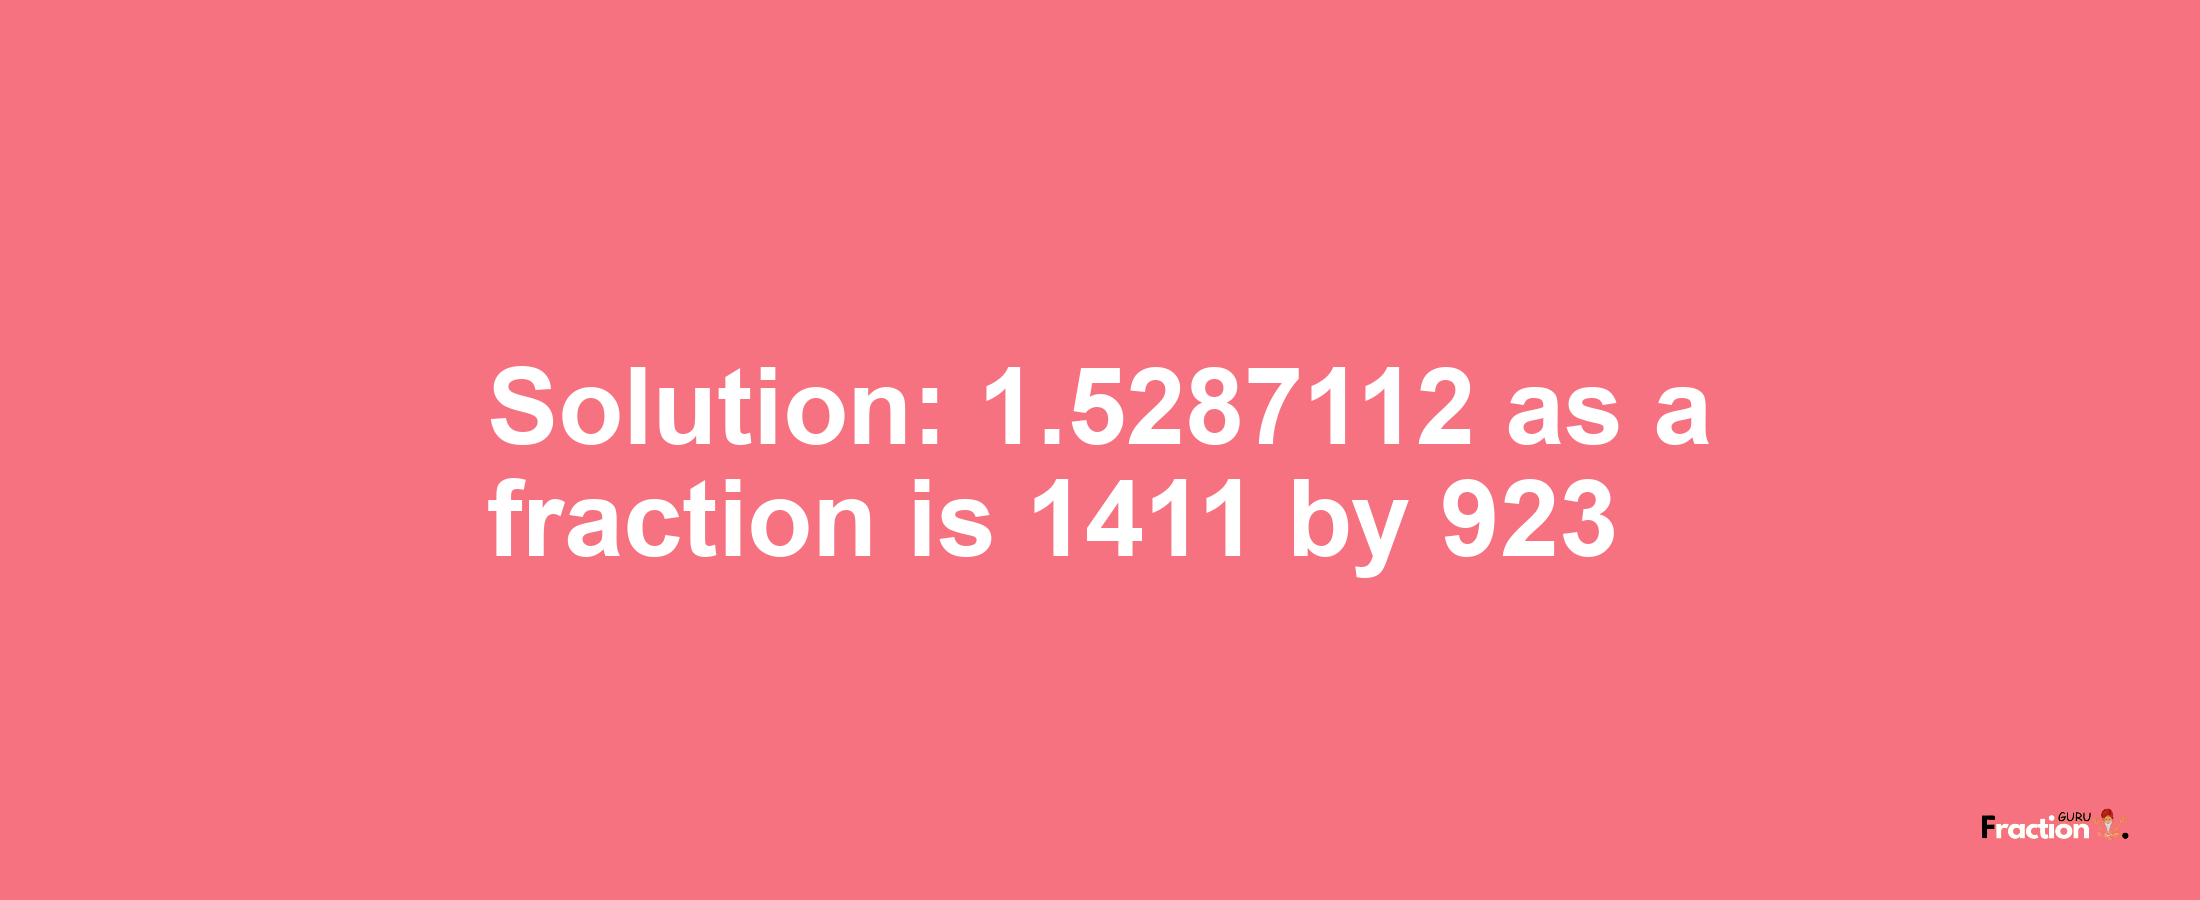 Solution:1.5287112 as a fraction is 1411/923